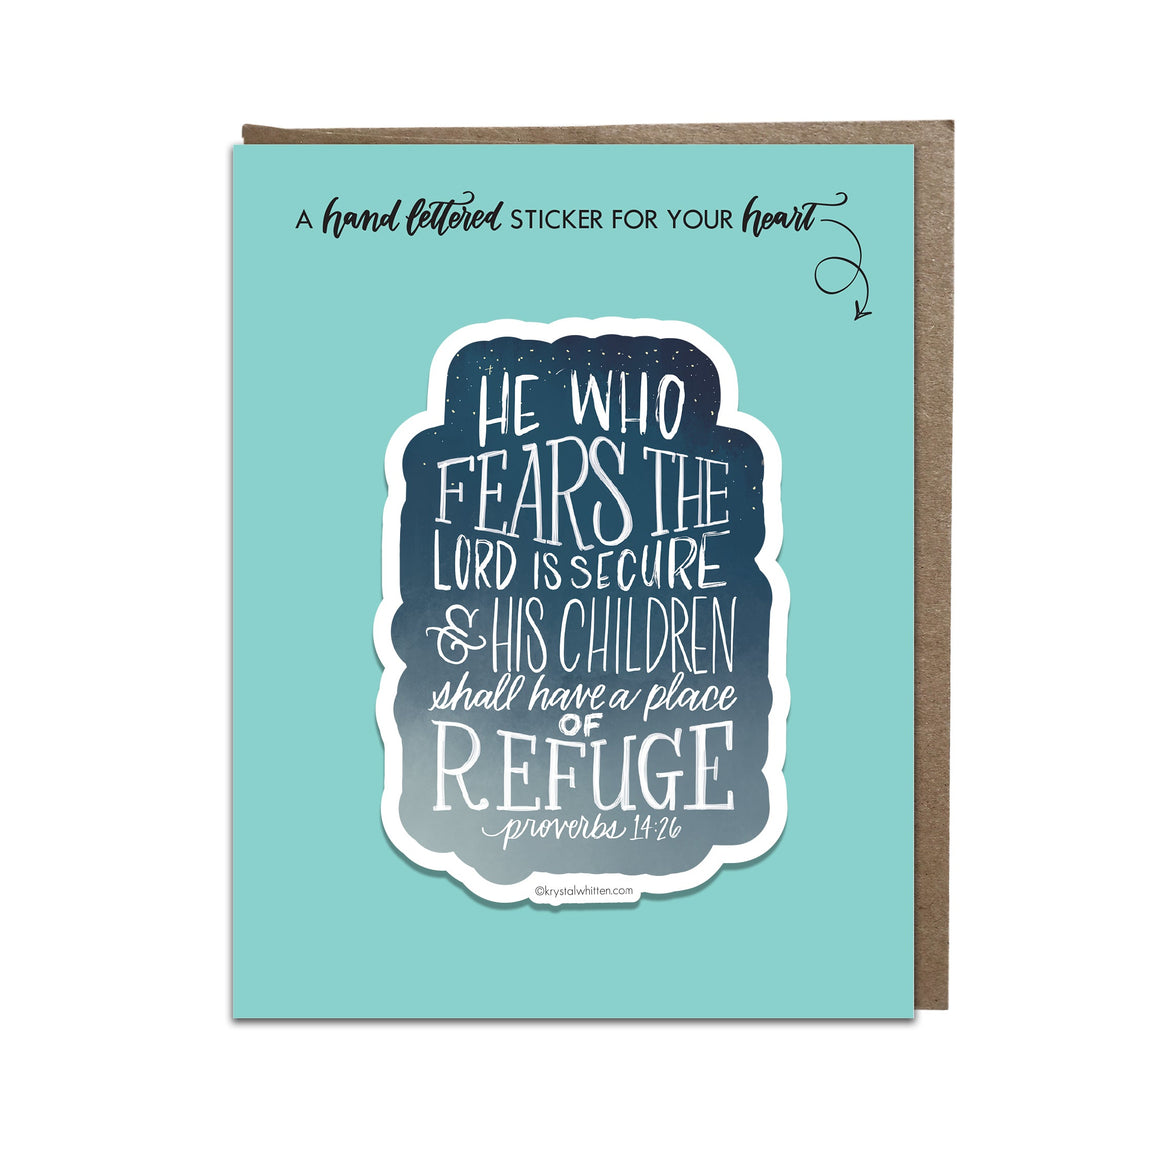 "He Who Fears the Lord" sticker card